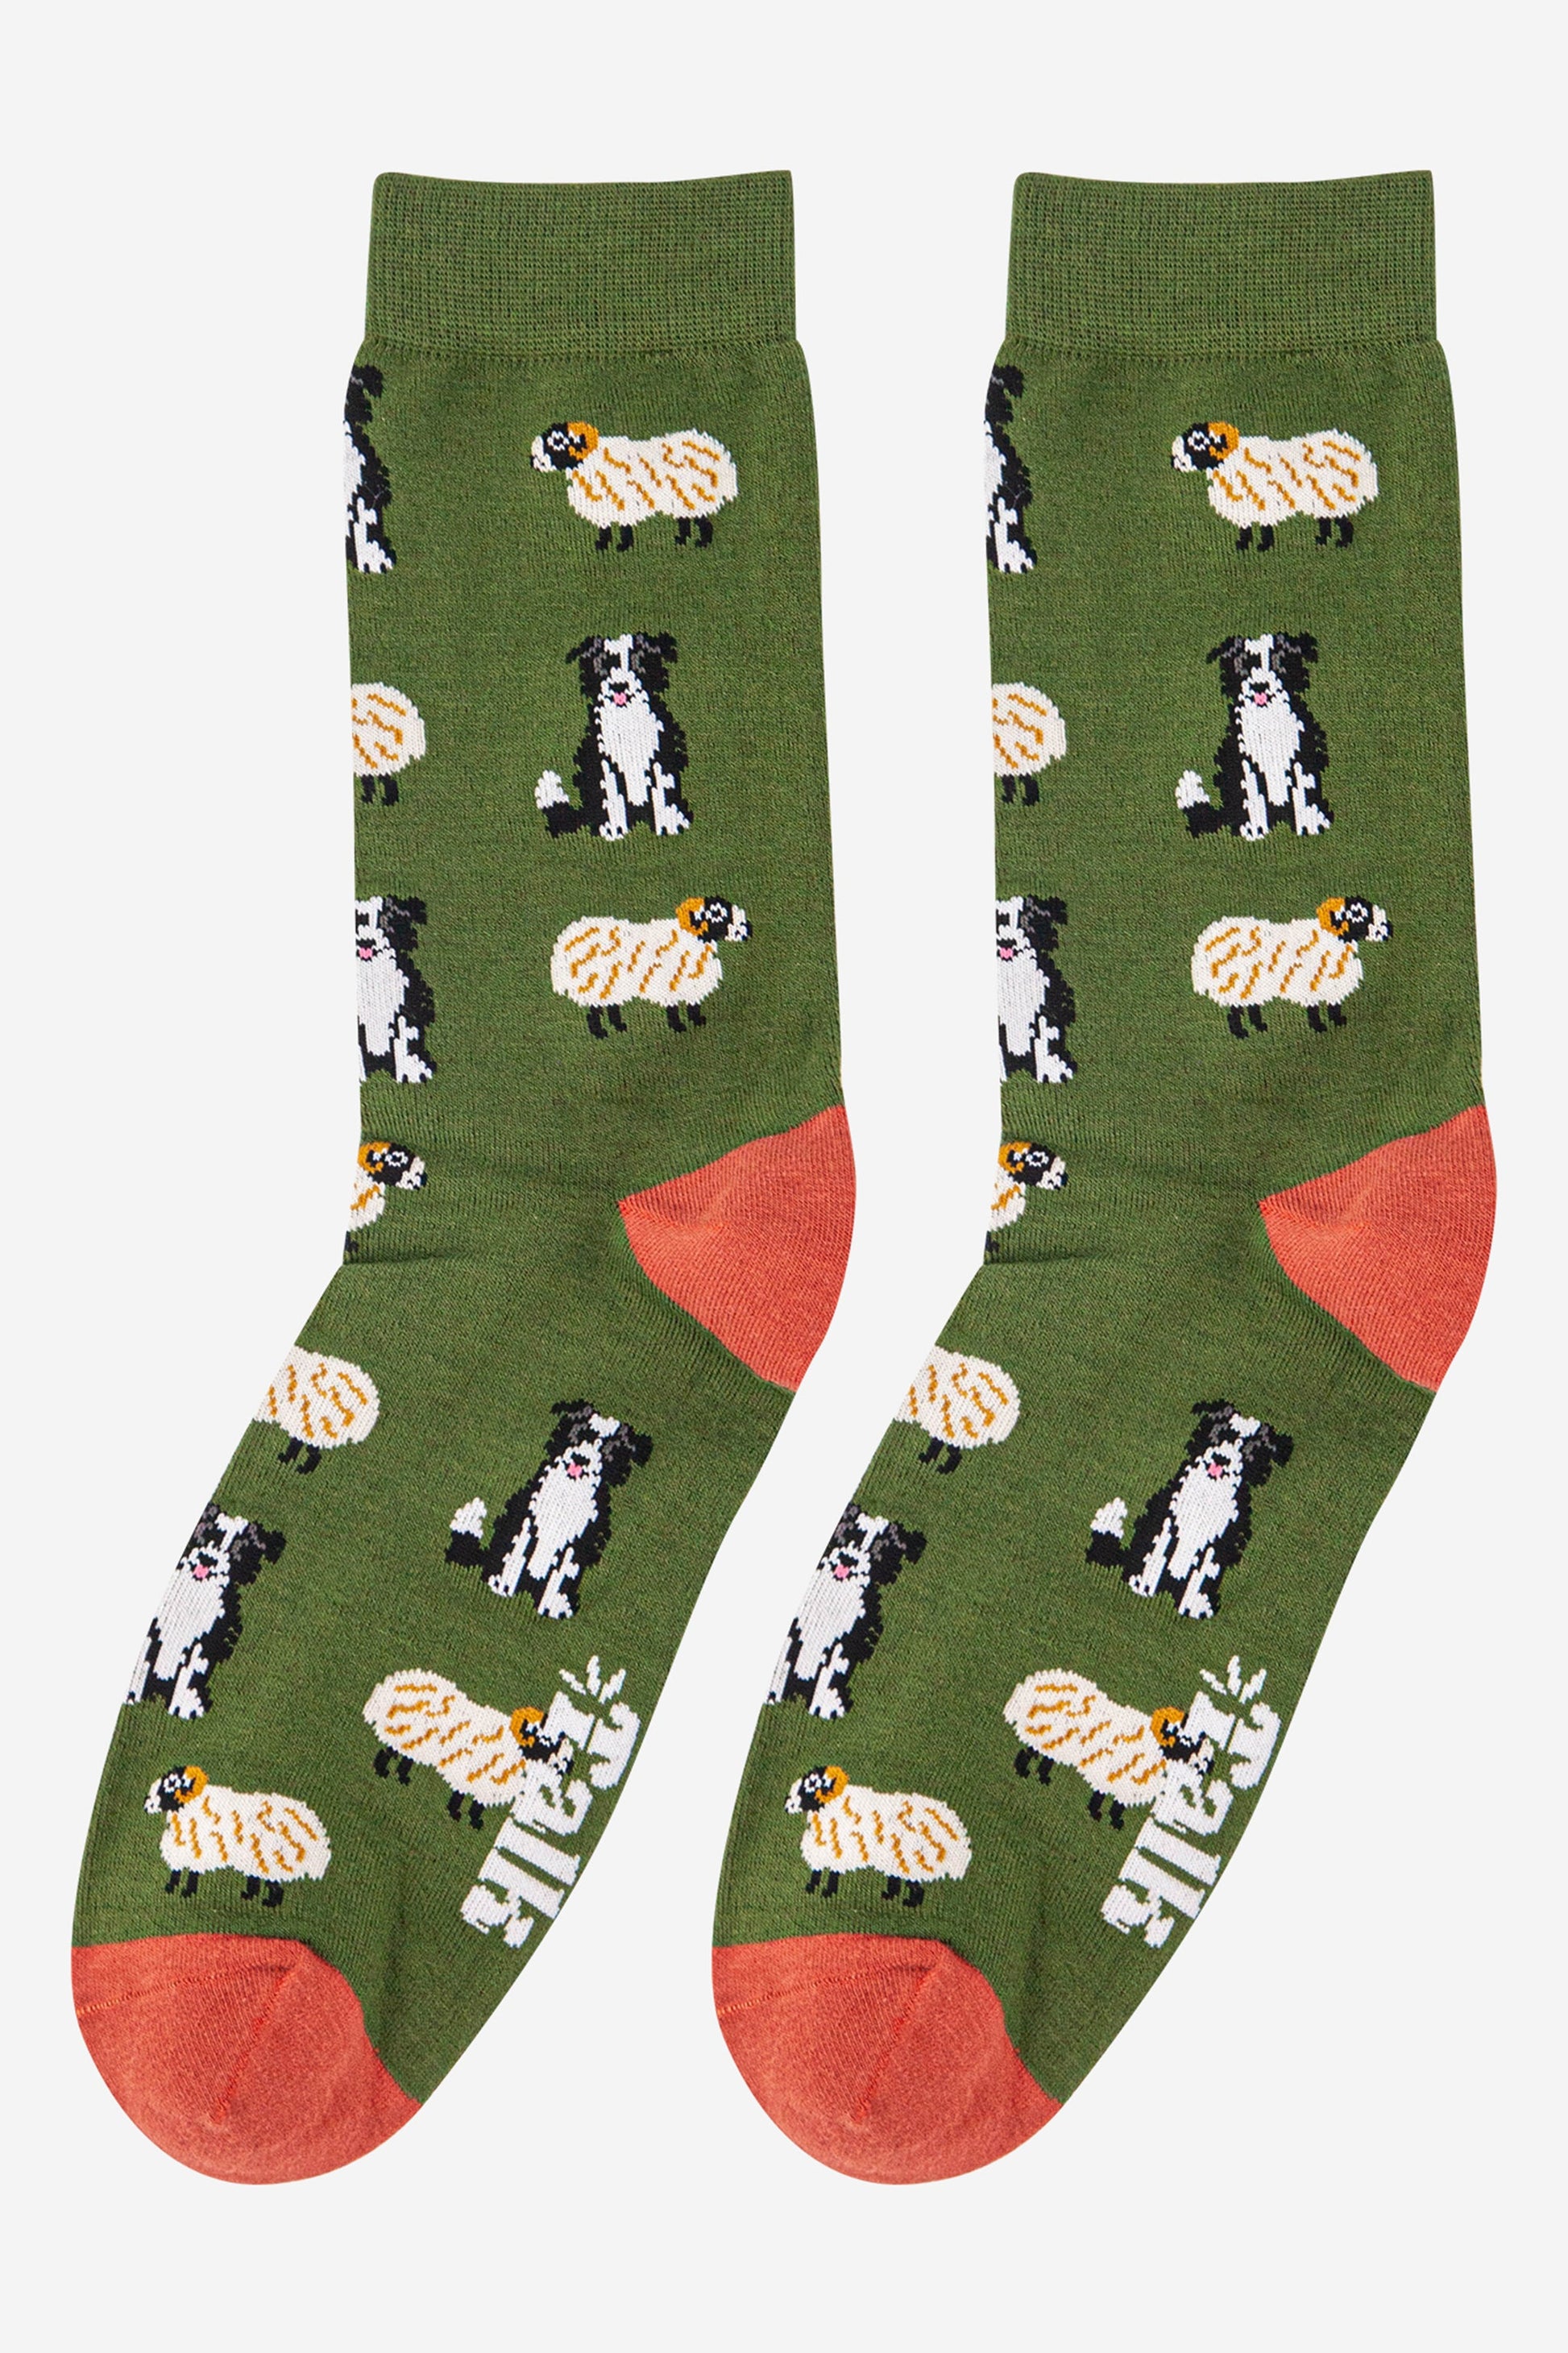 green dress socks with an all over pattern of border collie sheepdogs and sheep